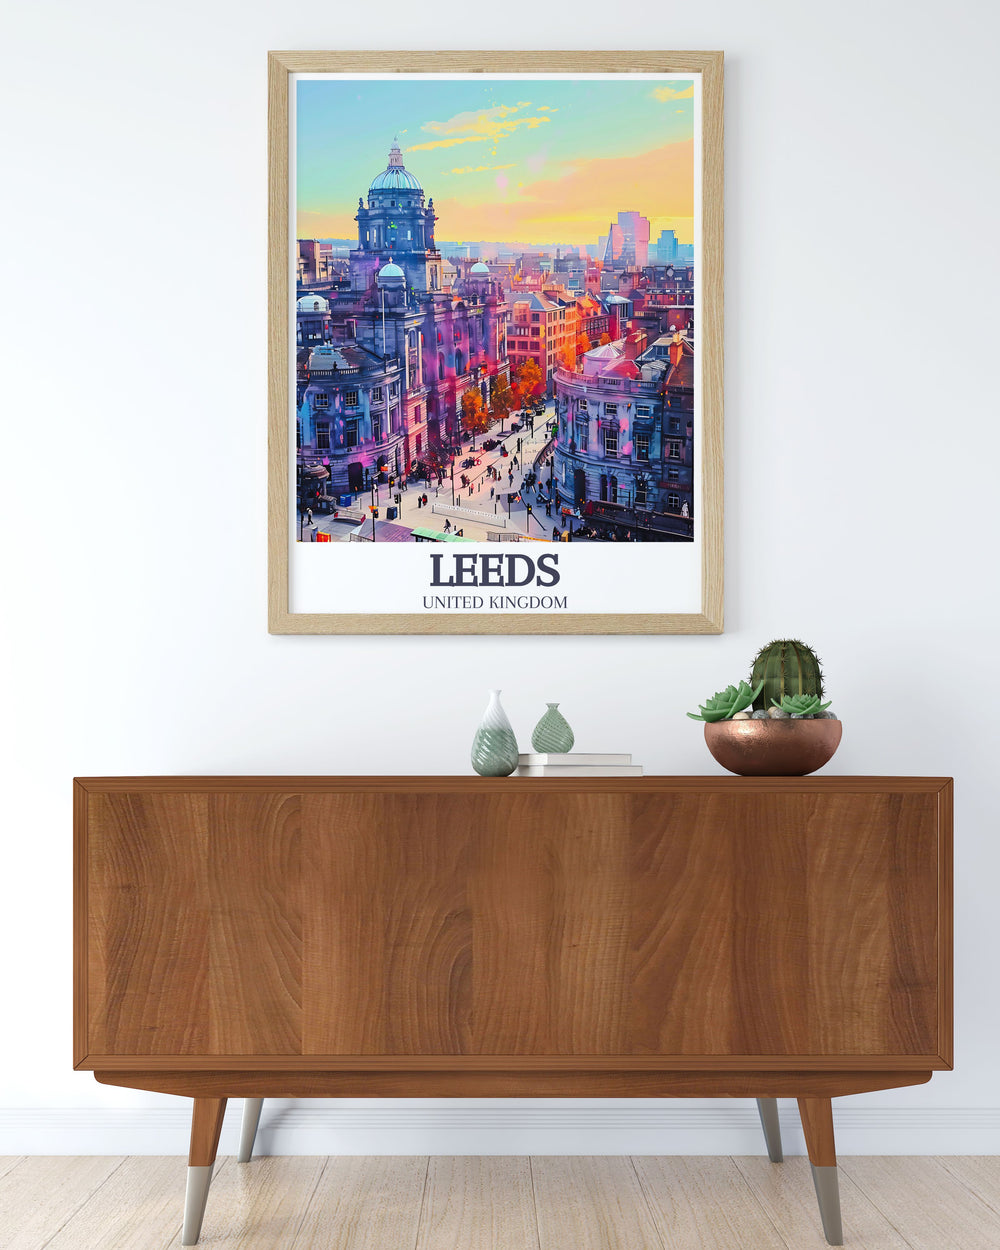 Elegant Leeds Corn Exchange and Briggate High Street poster featuring detailed artwork of historic landmarks in Leeds. Perfect for adding a touch of England charm to any room with this beautiful Leeds wall art and Leeds Corn Exchange vintage print.